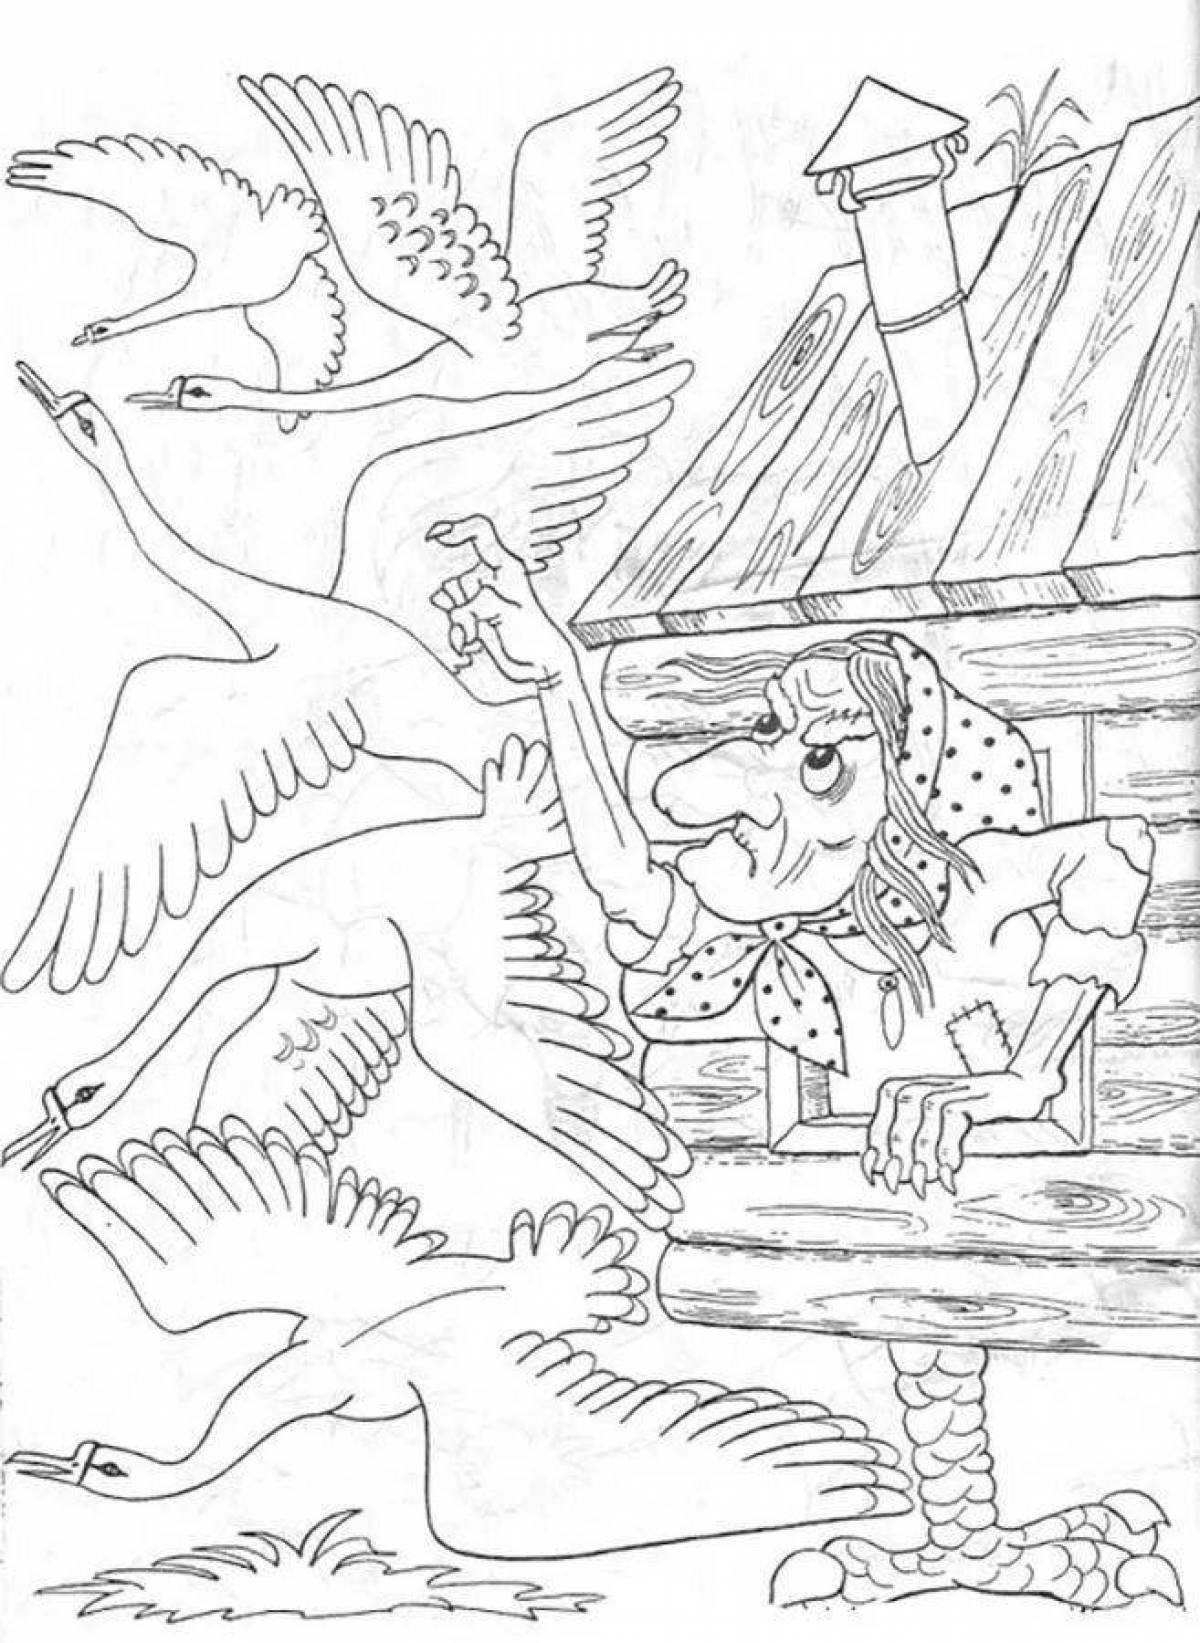 Joyful swan geese coloring pages for kids